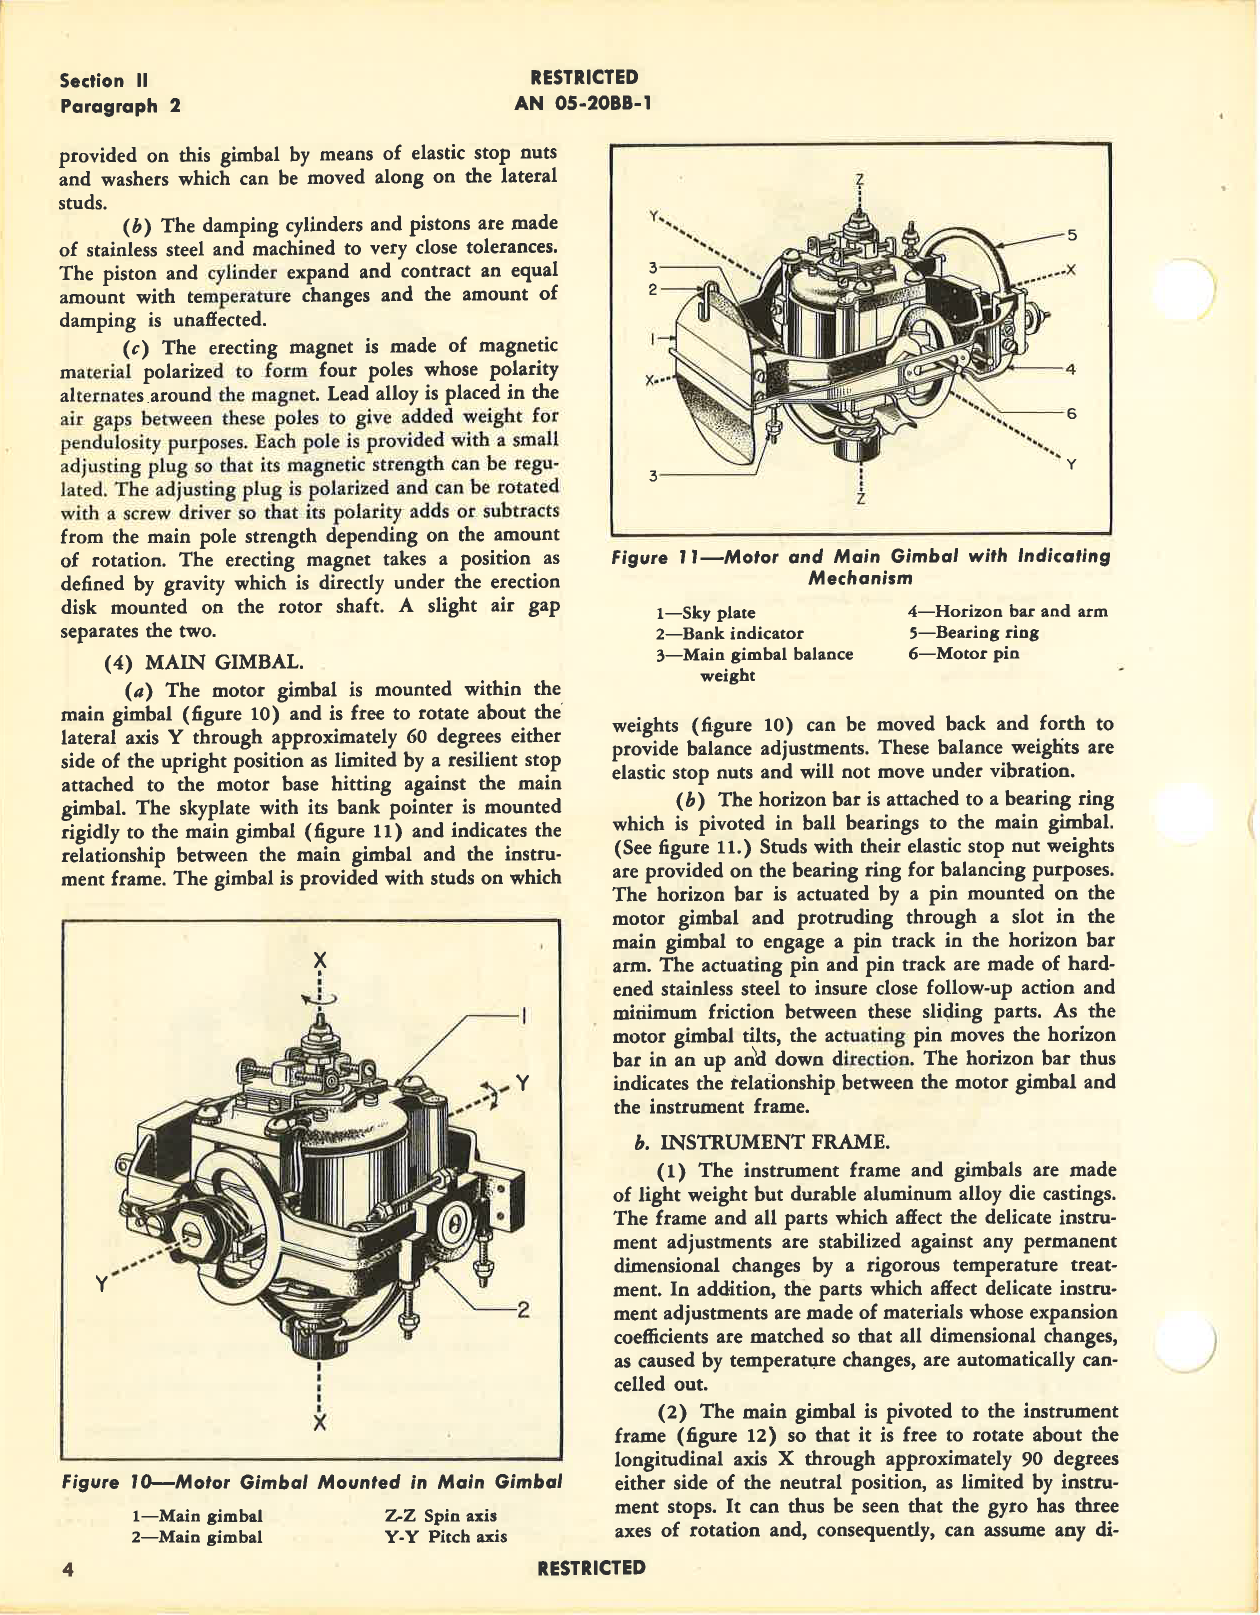 Sample page 8 from AirCorps Library document: Handbook of Instructions with Parts Catalog for Gyro Horizon Indicator Type E-1, F.S.S.C. 88-I-1357